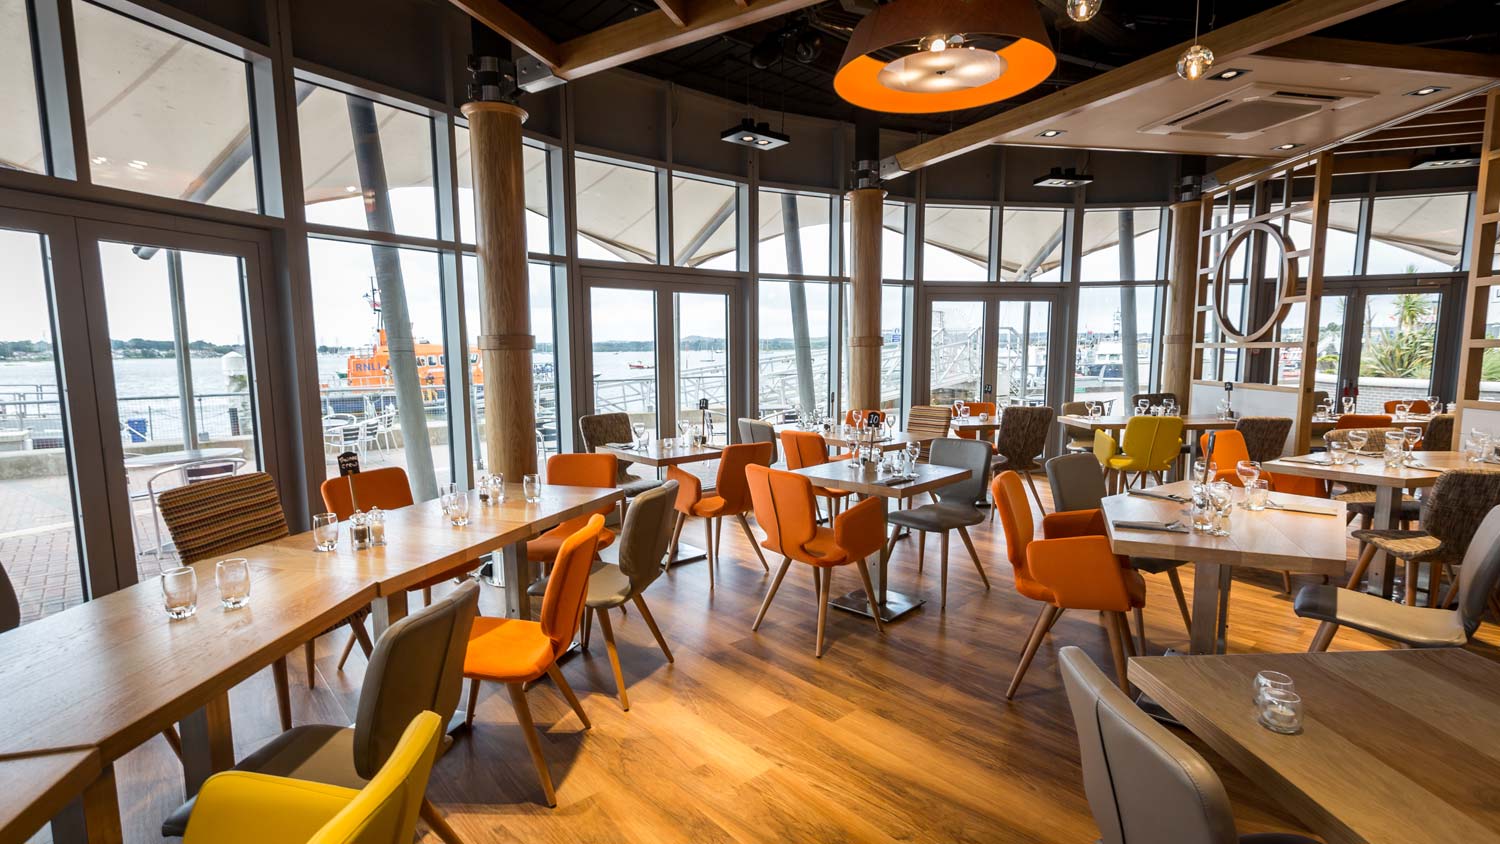 Riggers Restaurant at the RNLI College